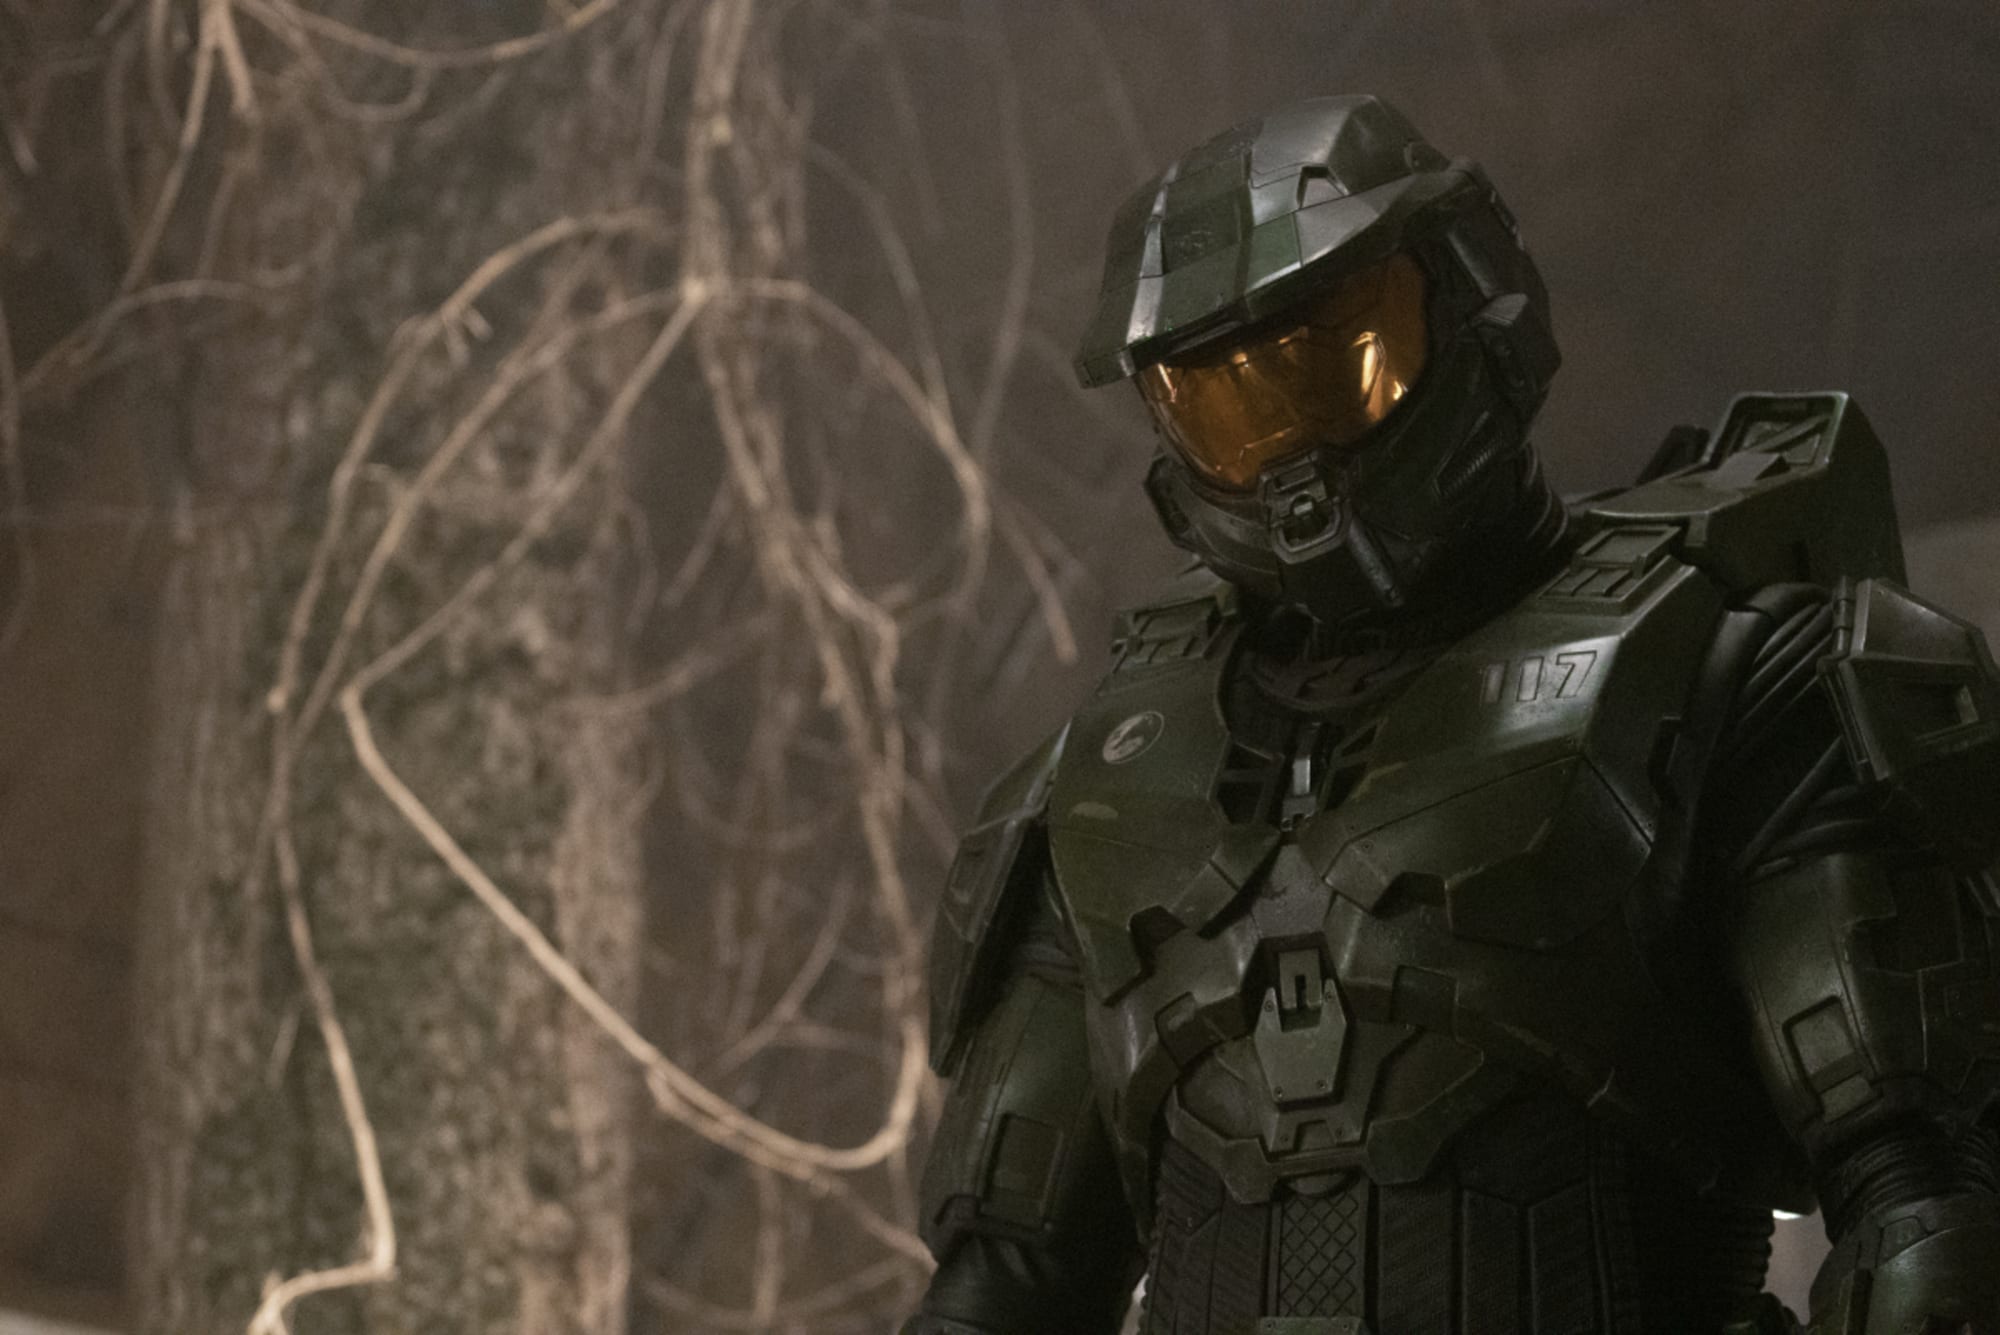 Halo Season 2 Release Date : Recap, Review, Spoilers, Streaming, Schedule &  Where To Watch? - SarkariResult